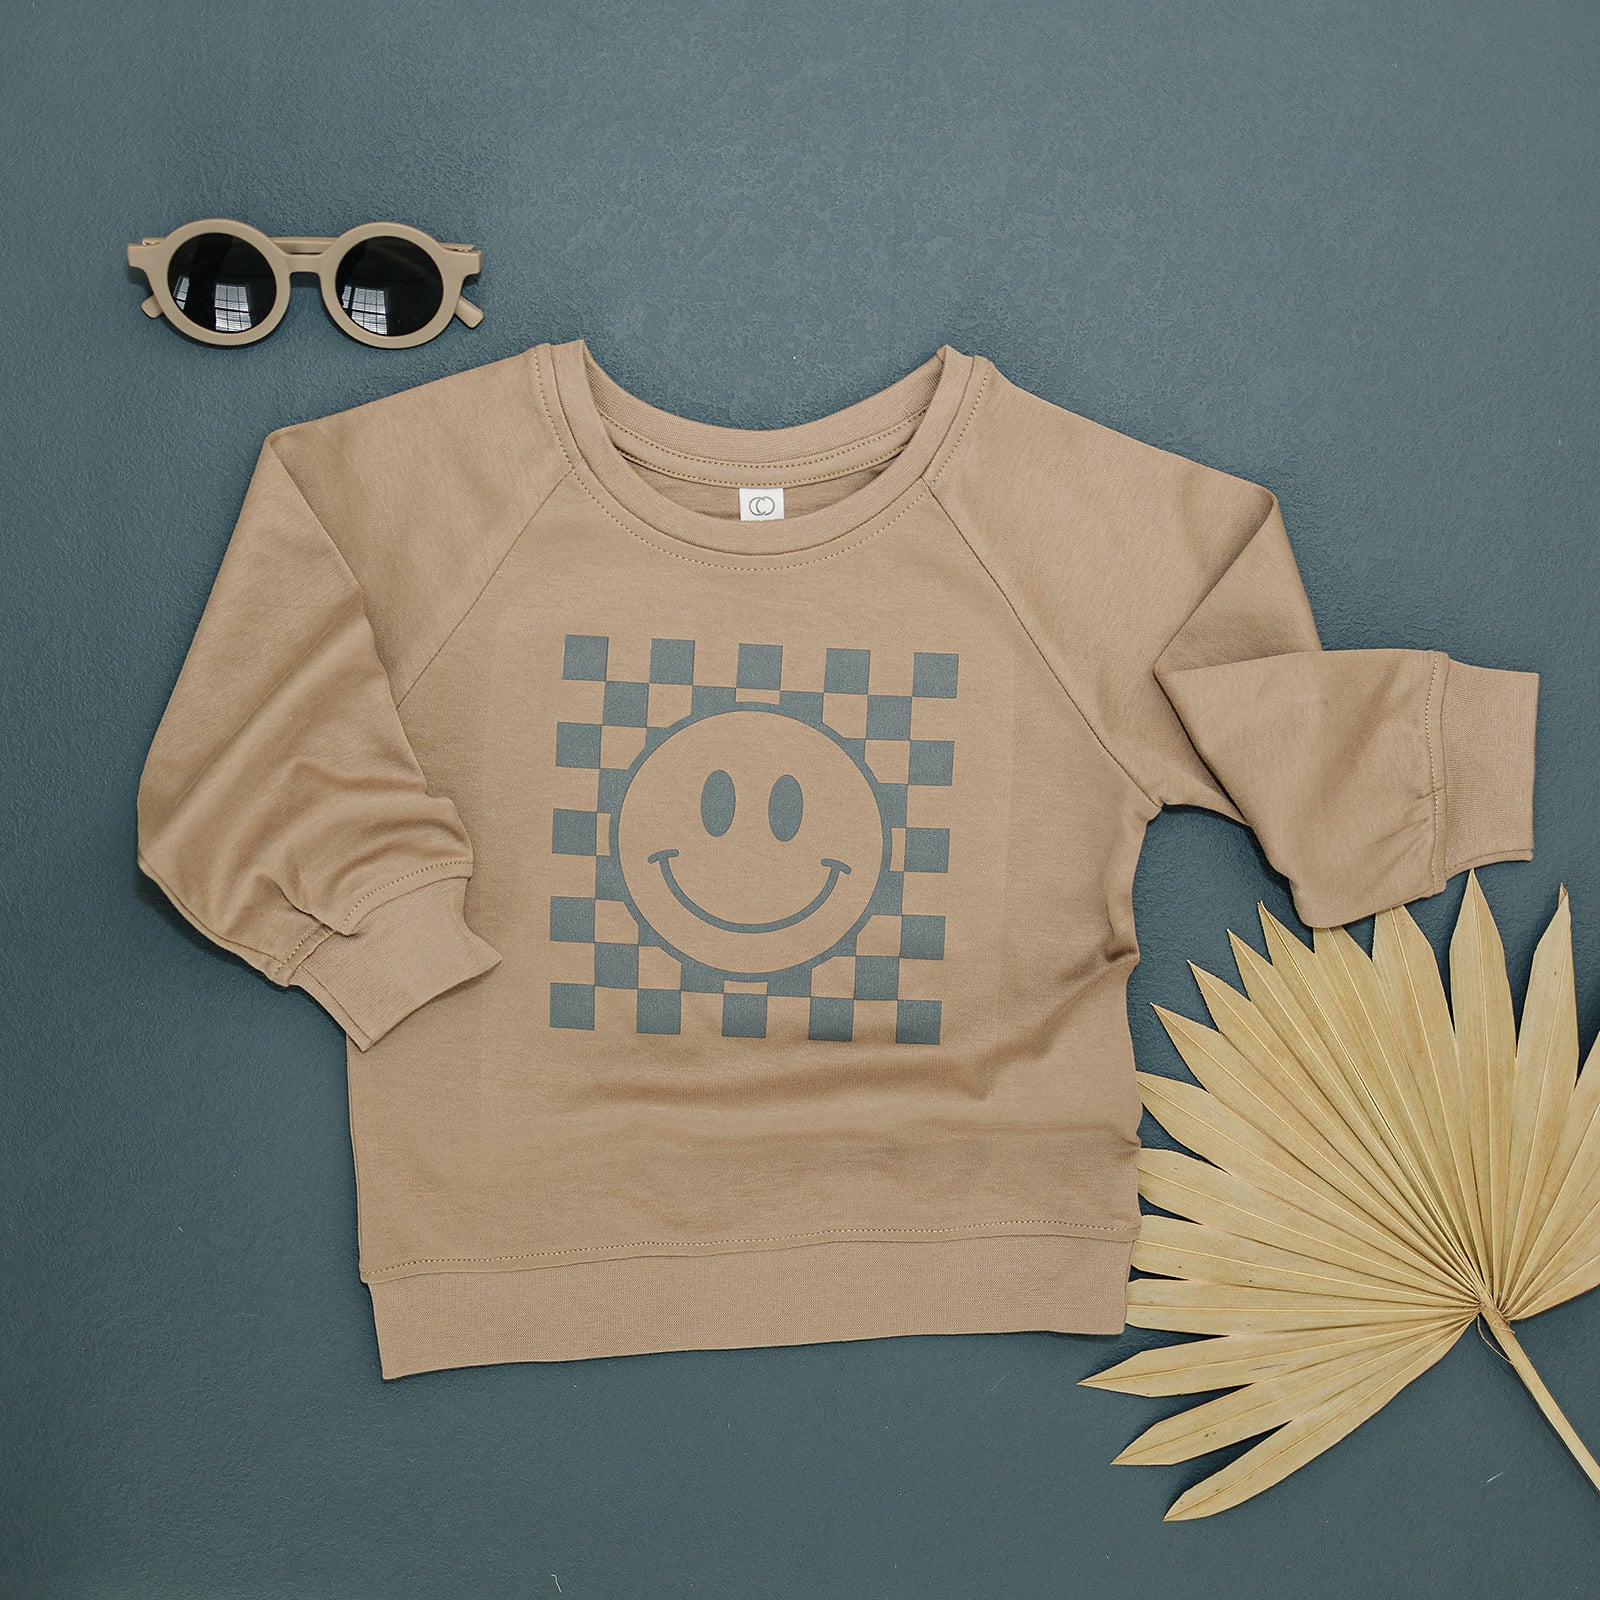 Stylish tan crewneck sweatshirt with a checkered smiley face design, displayed with a pair of round sunglasses and a dried palm fan on a dark grey background